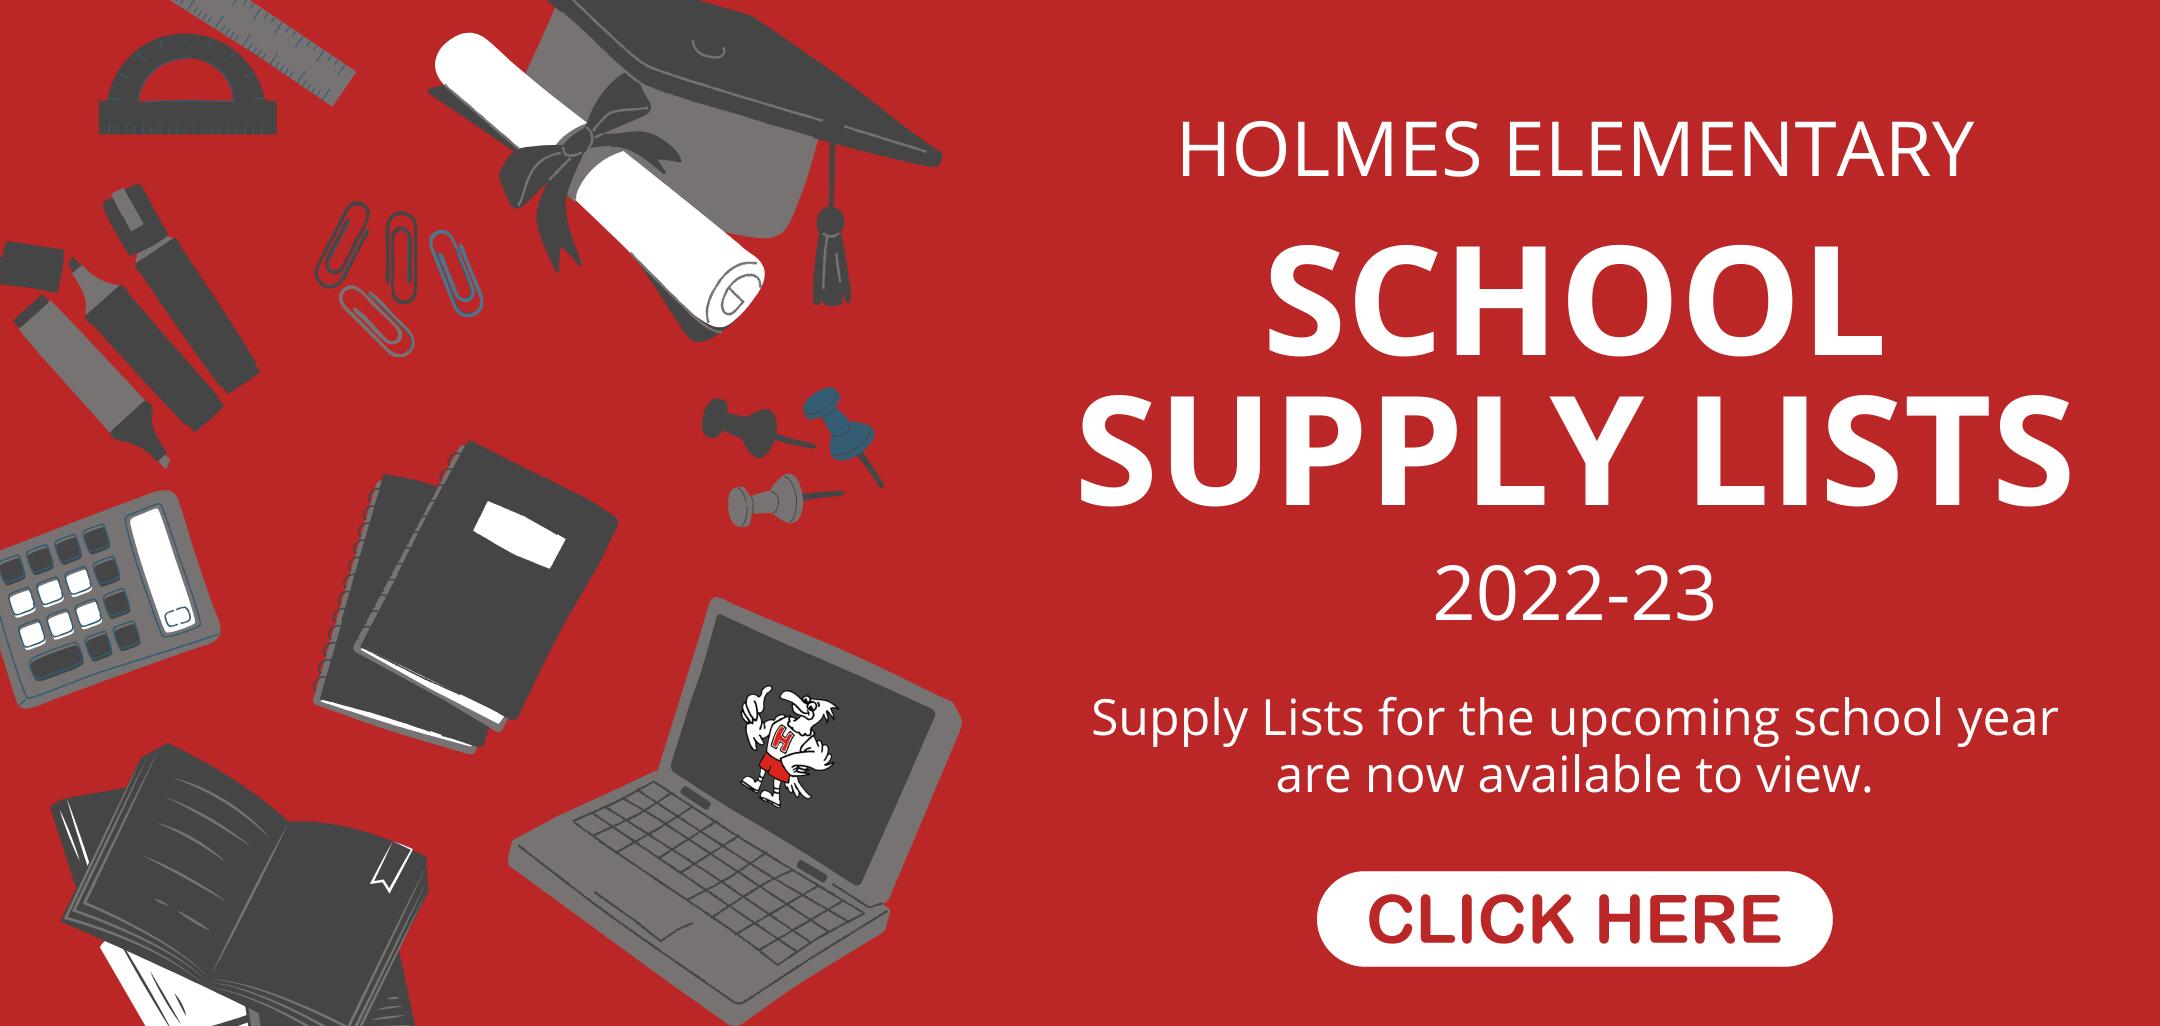 Click to view the 2022-23 Holmes School Supply Lists